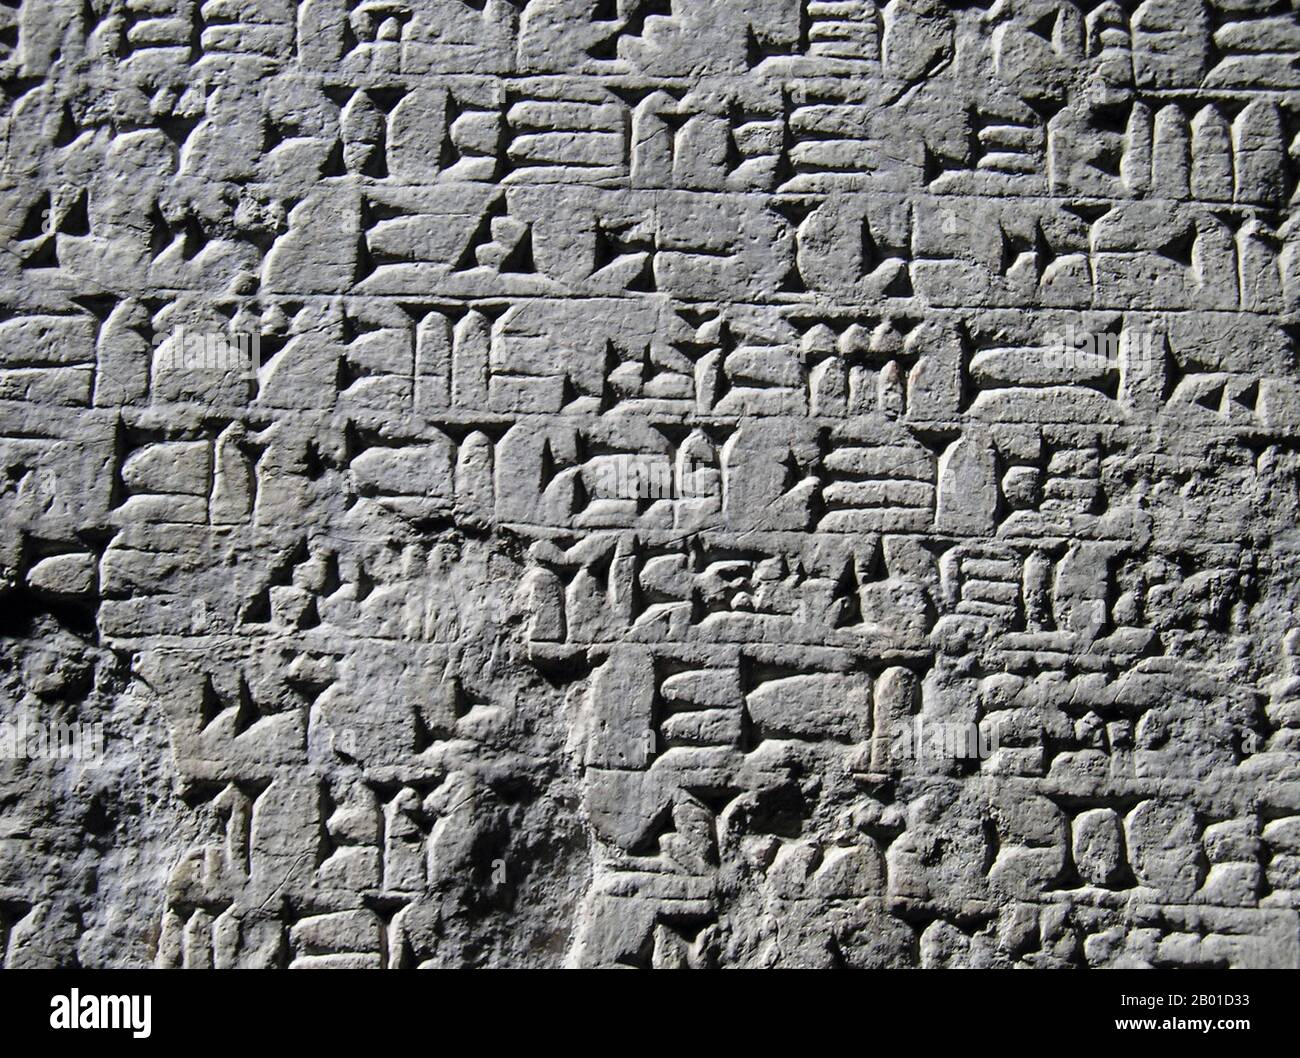 Iraq: Detail of Akkadian cuneiform wedge writing, c. 2500 BCE.  Cuneiform script is one of the earliest known forms of written expression. Emerging in Sumer around the 30th century BC, with predecessors reaching into the late 4th millennium (the Uruk IV period), cuneiform writing began as a system of pictographs. In the three millennia the script spanned, the pictorial representations became simplified and more abstract as the number of characters in use also grew gradually smaller, from about 1,000 unique characters in the Early Bronze Age to about 400 unique characters in Late Bronze Age. Stock Photo